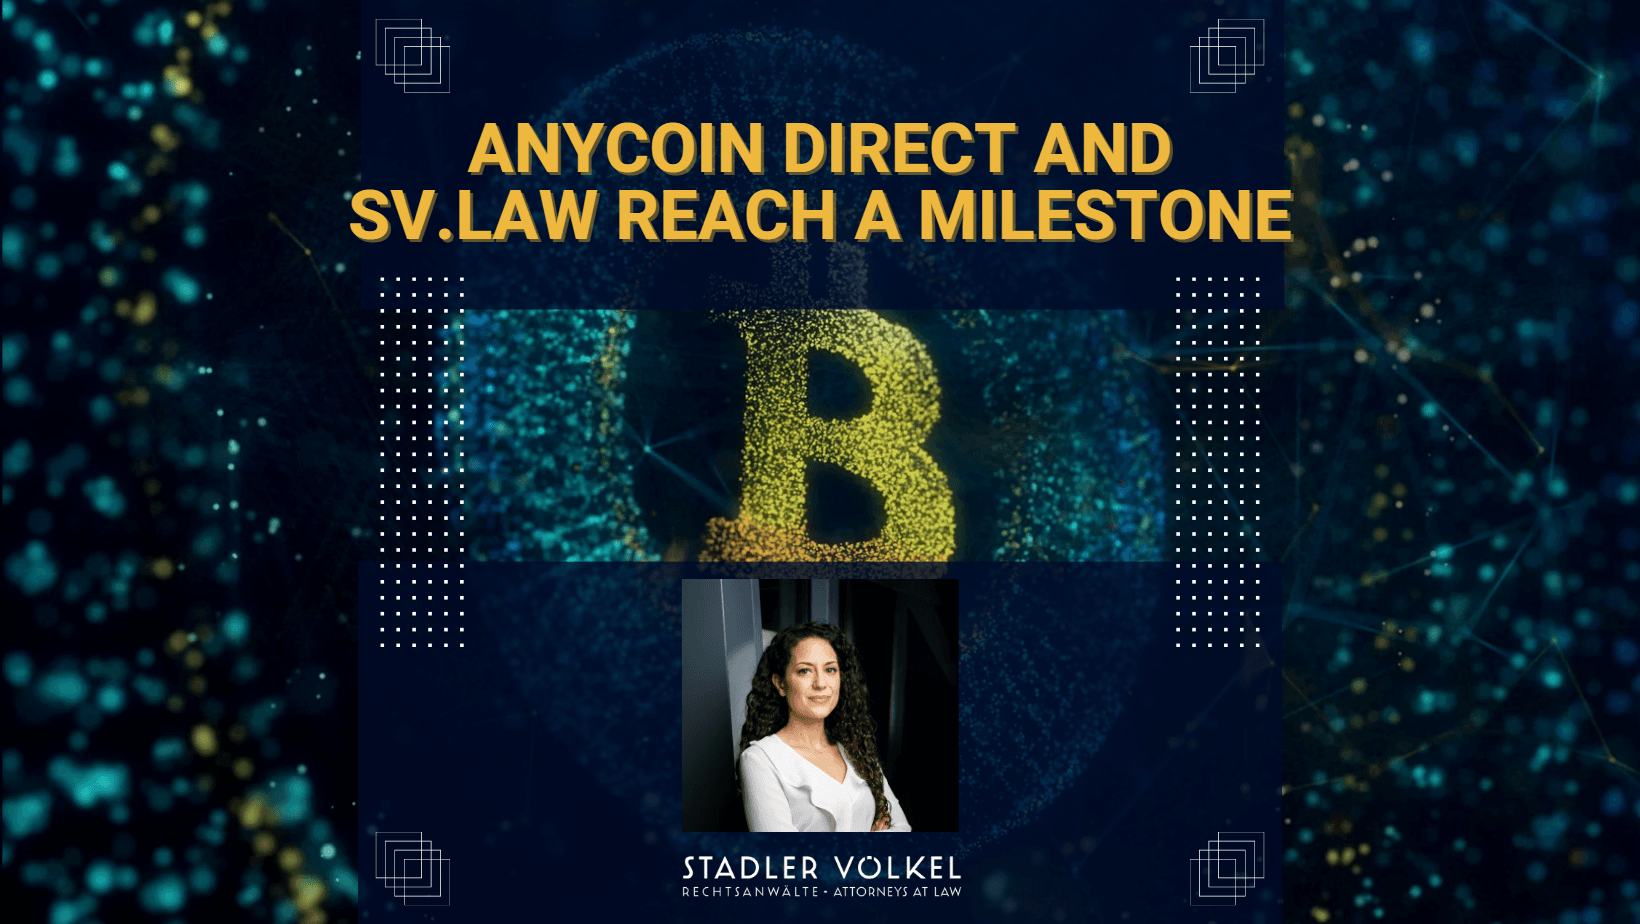 Anycoin Direct and SV.LAW reach a milestone